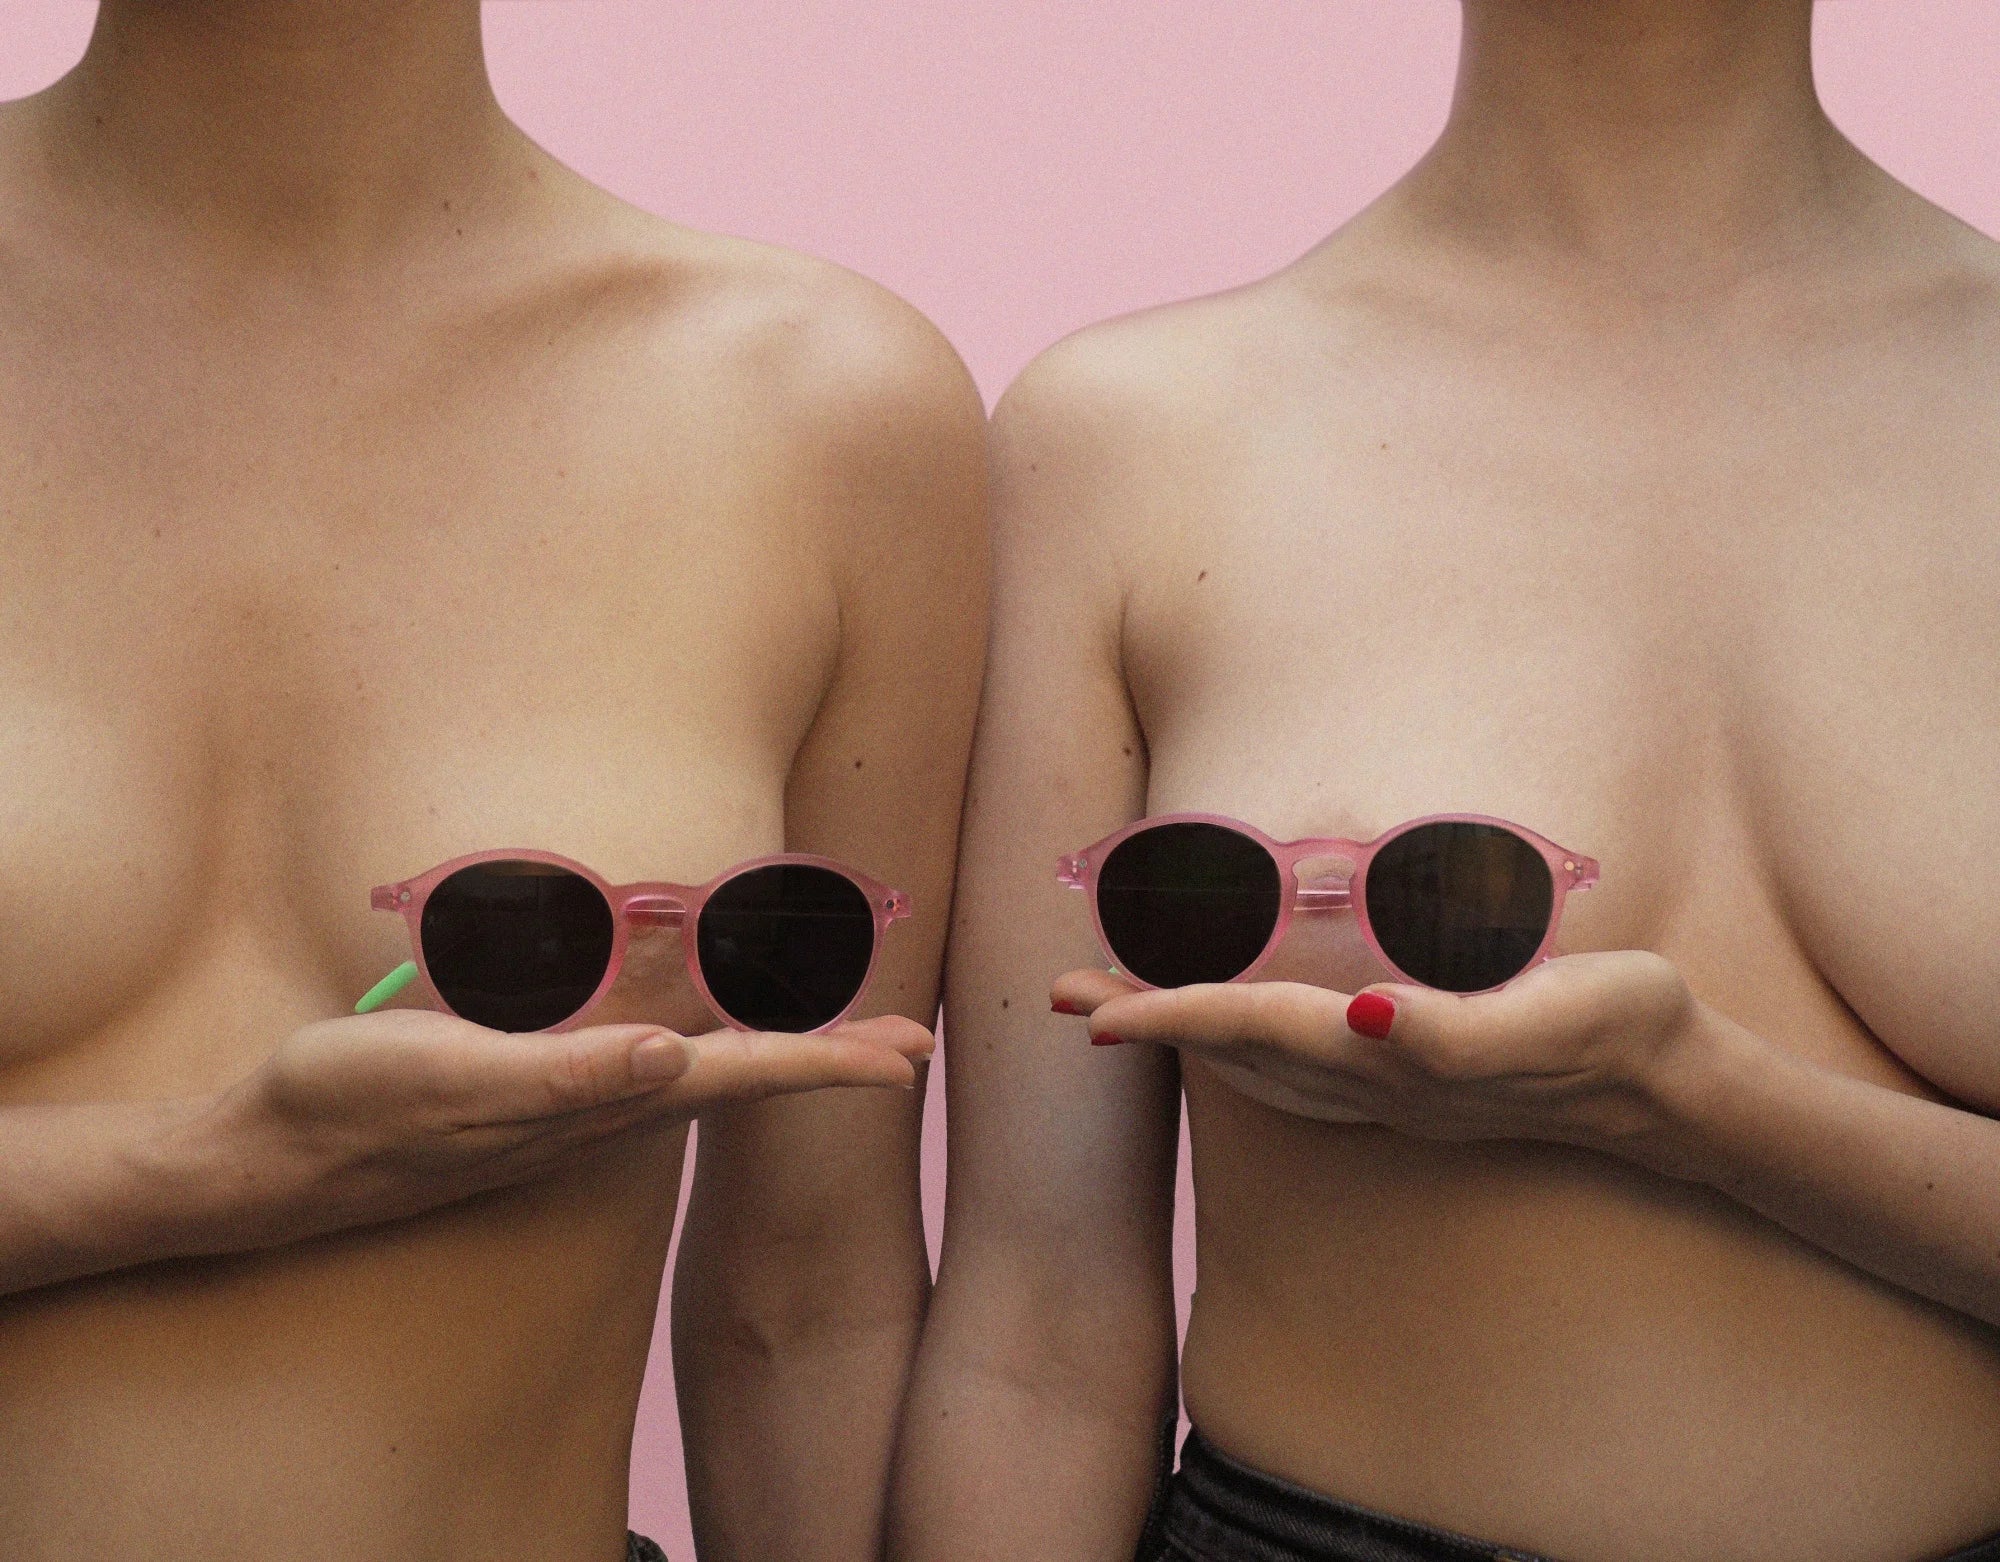 Photograph of two La Vue En Rose sunglasses frames worn by two female models. The frames cover the chests of both models.